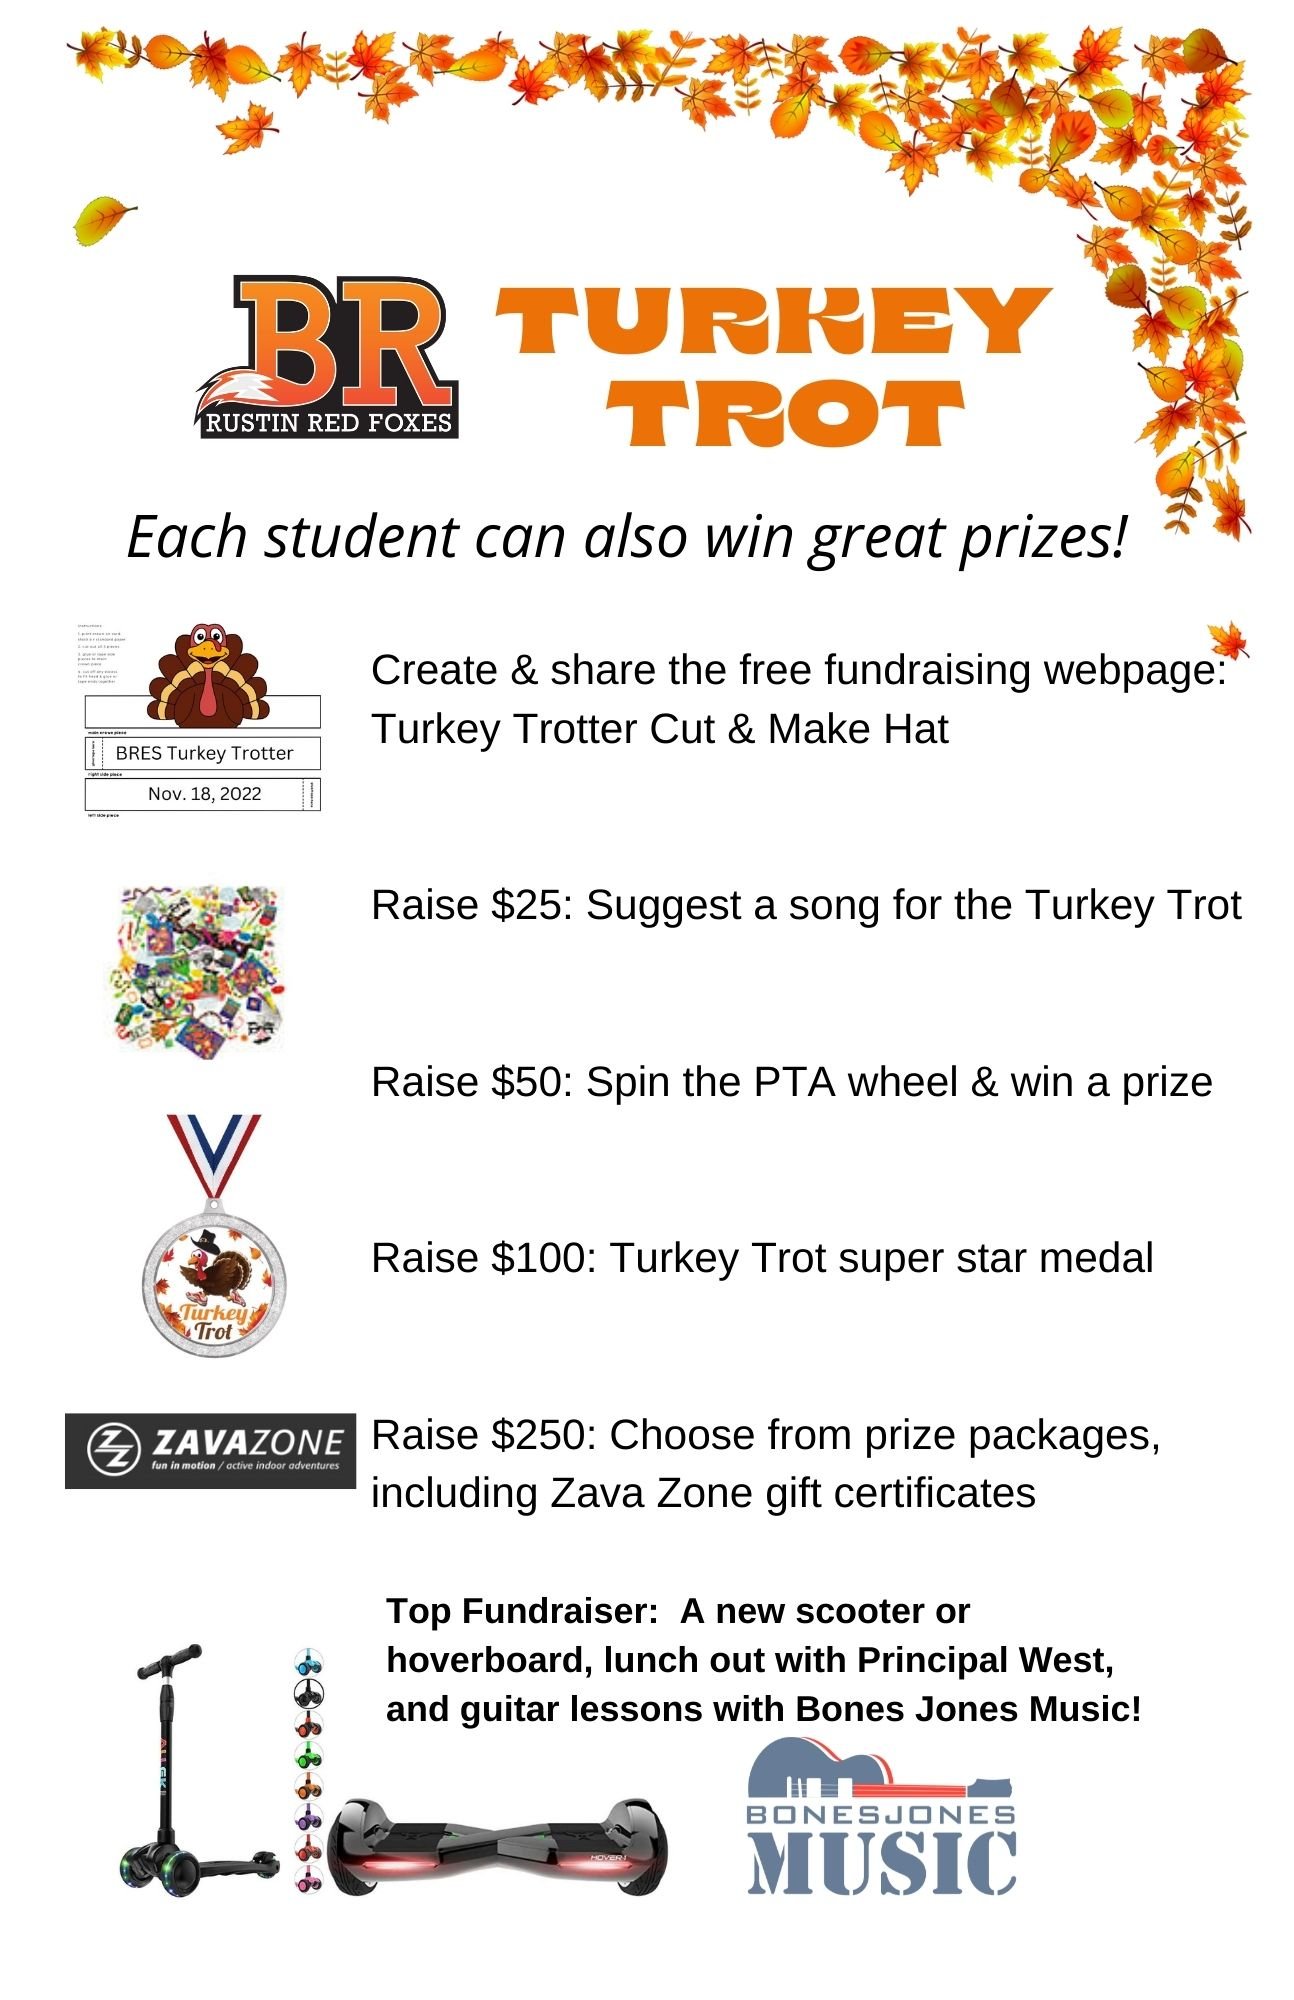 Free Fundraising Prizes - Fundraiser Prizes for Schools